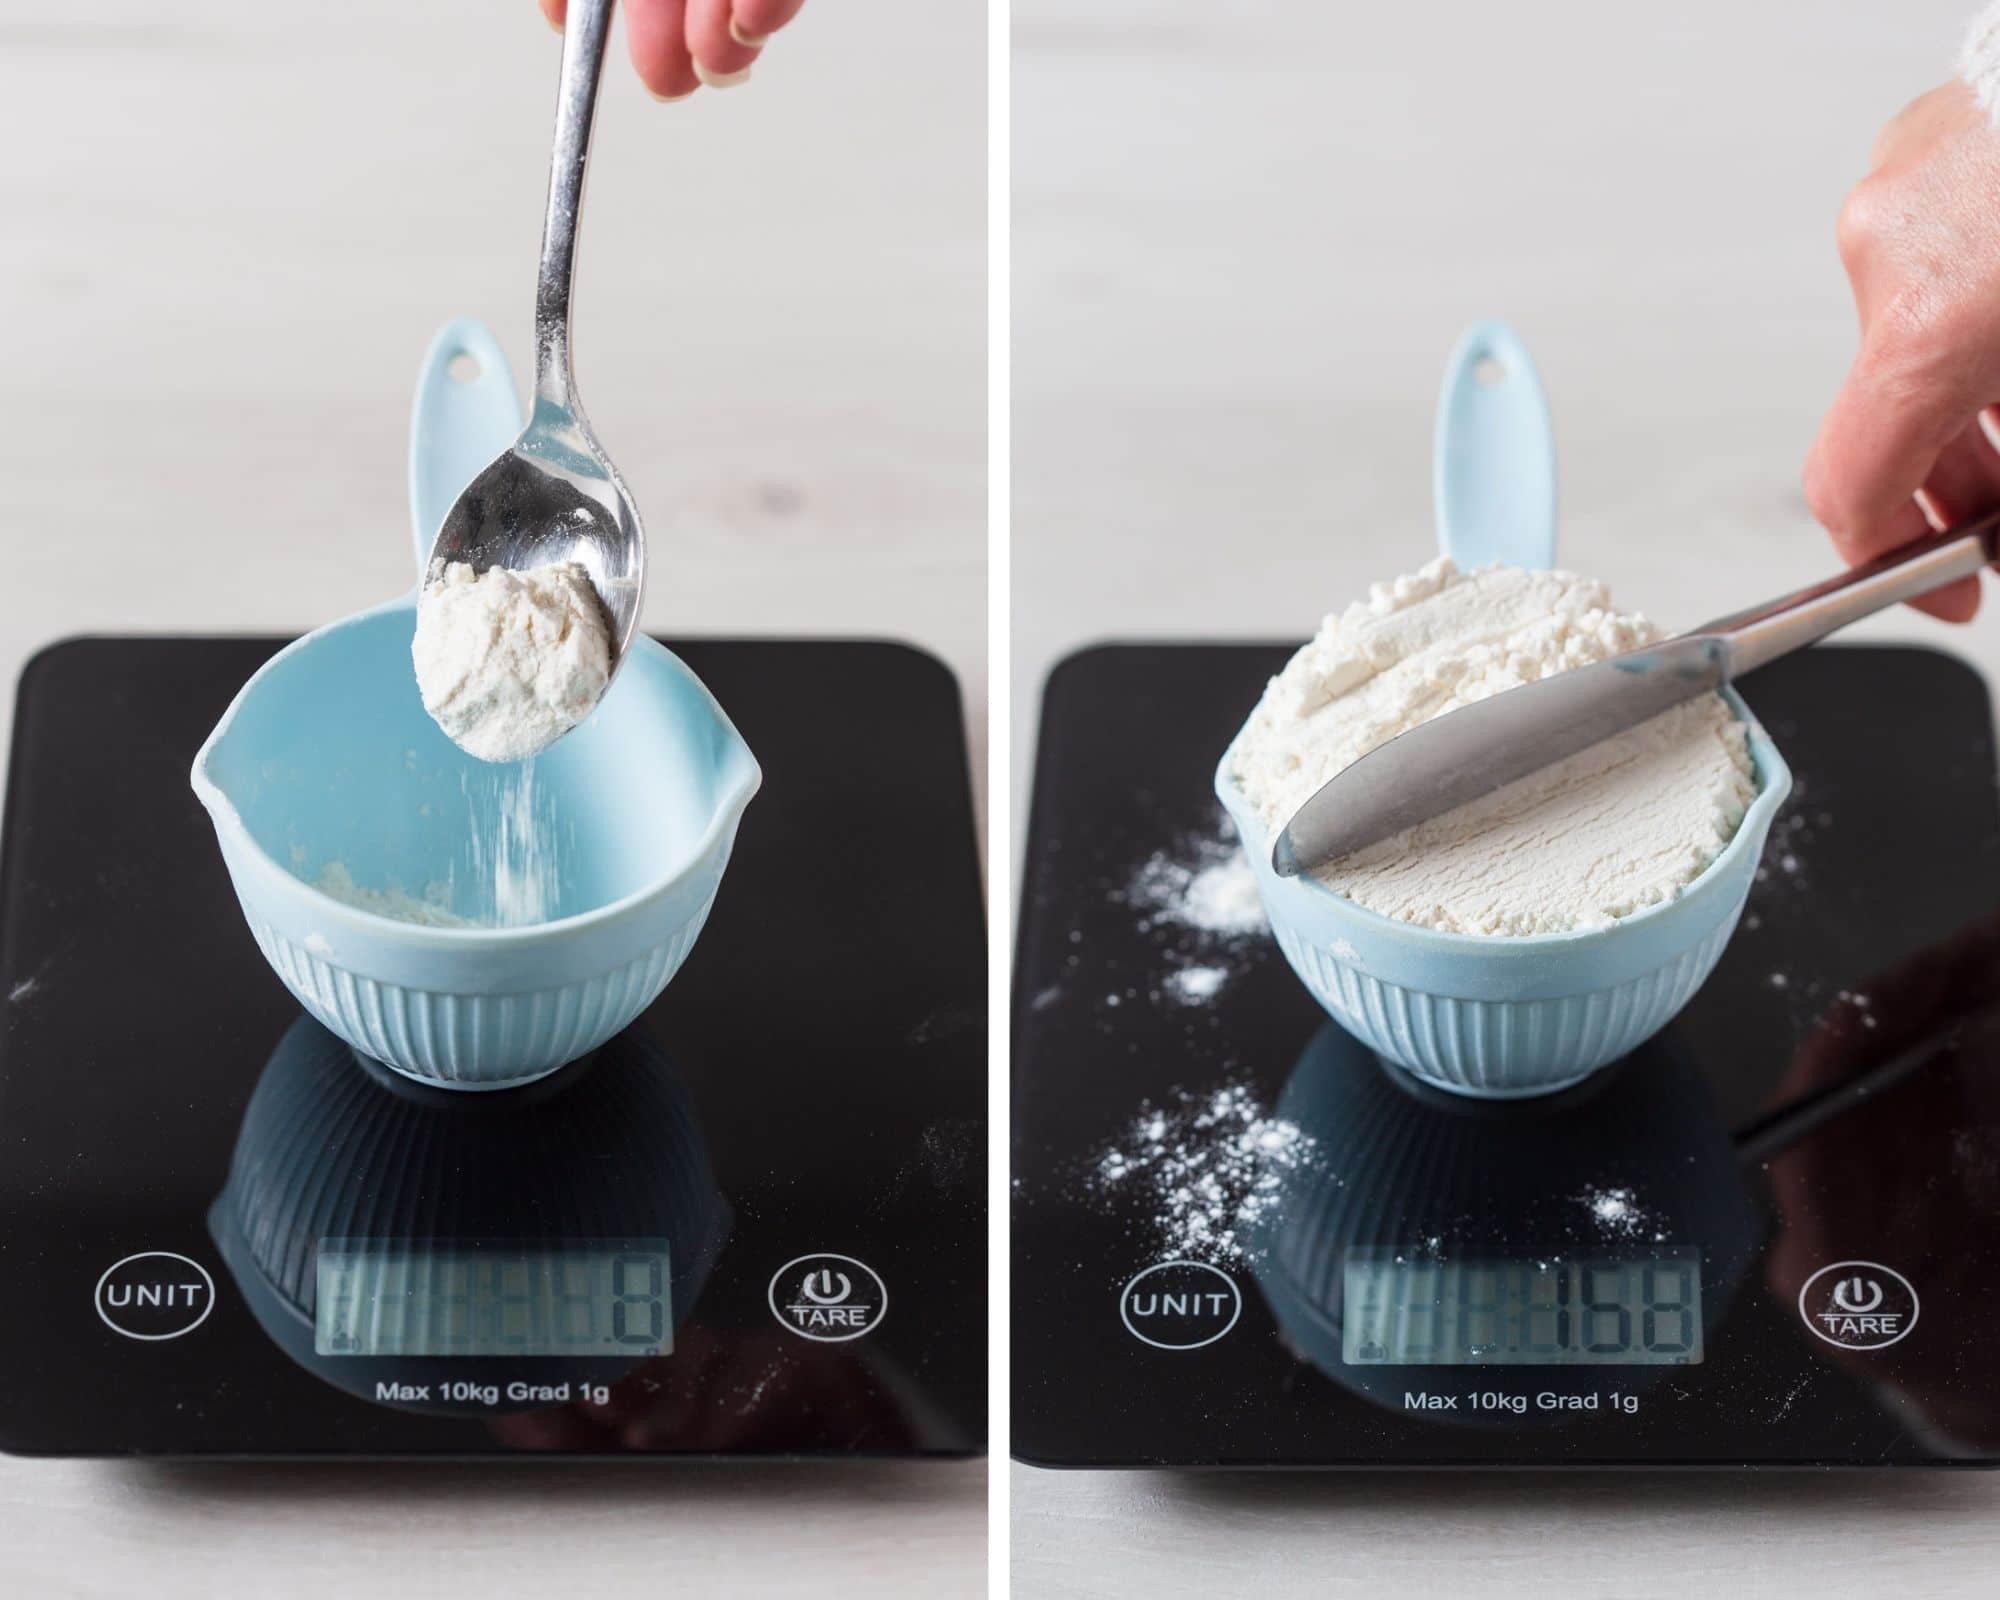 Spooning flour into measuring cup